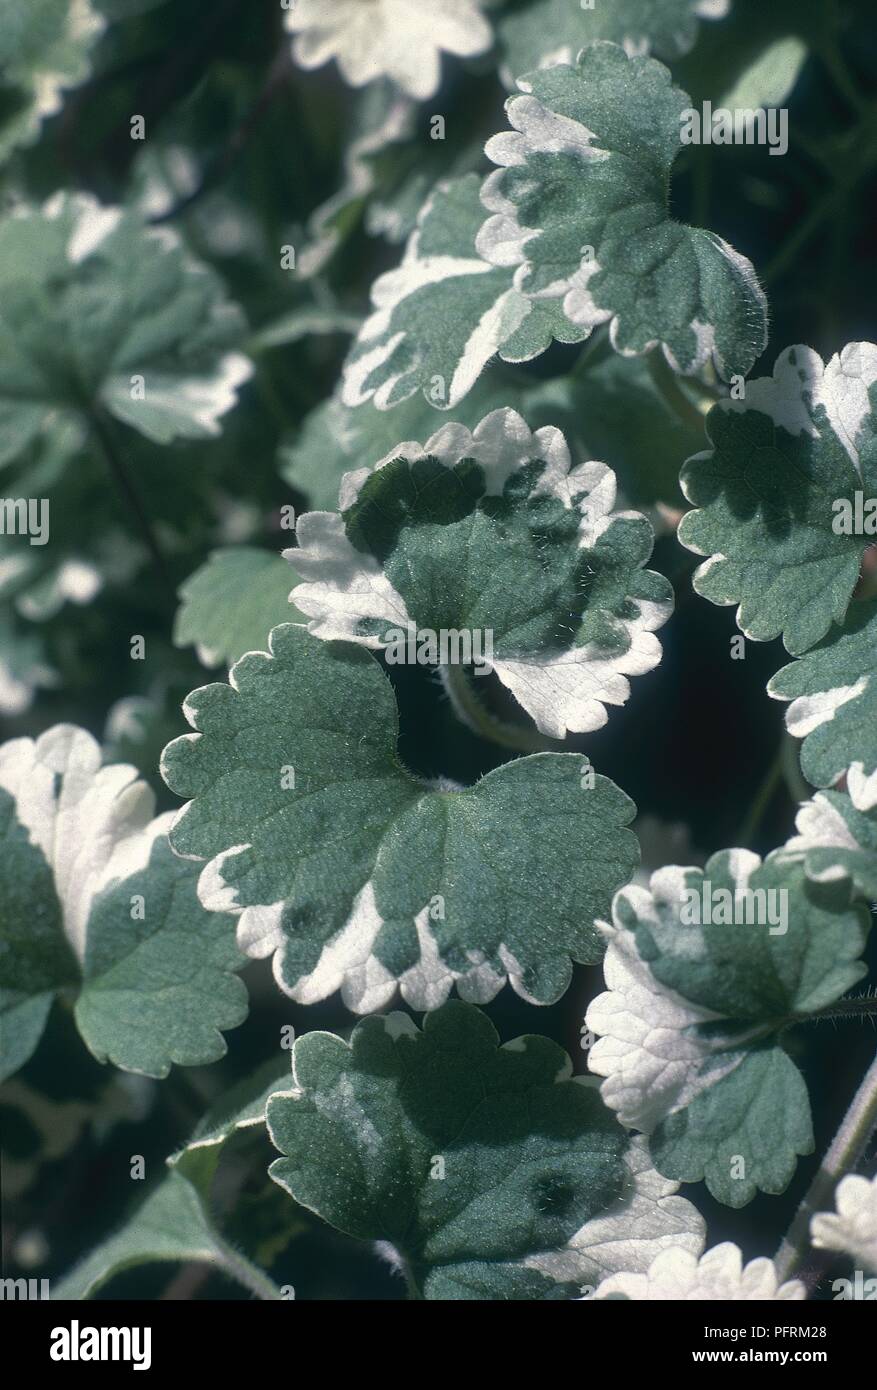 Glechoma hederacea 'Variegata' (Variegated Ground Ivy) evergreen with green ad white leaves, close-uo Stock Photo